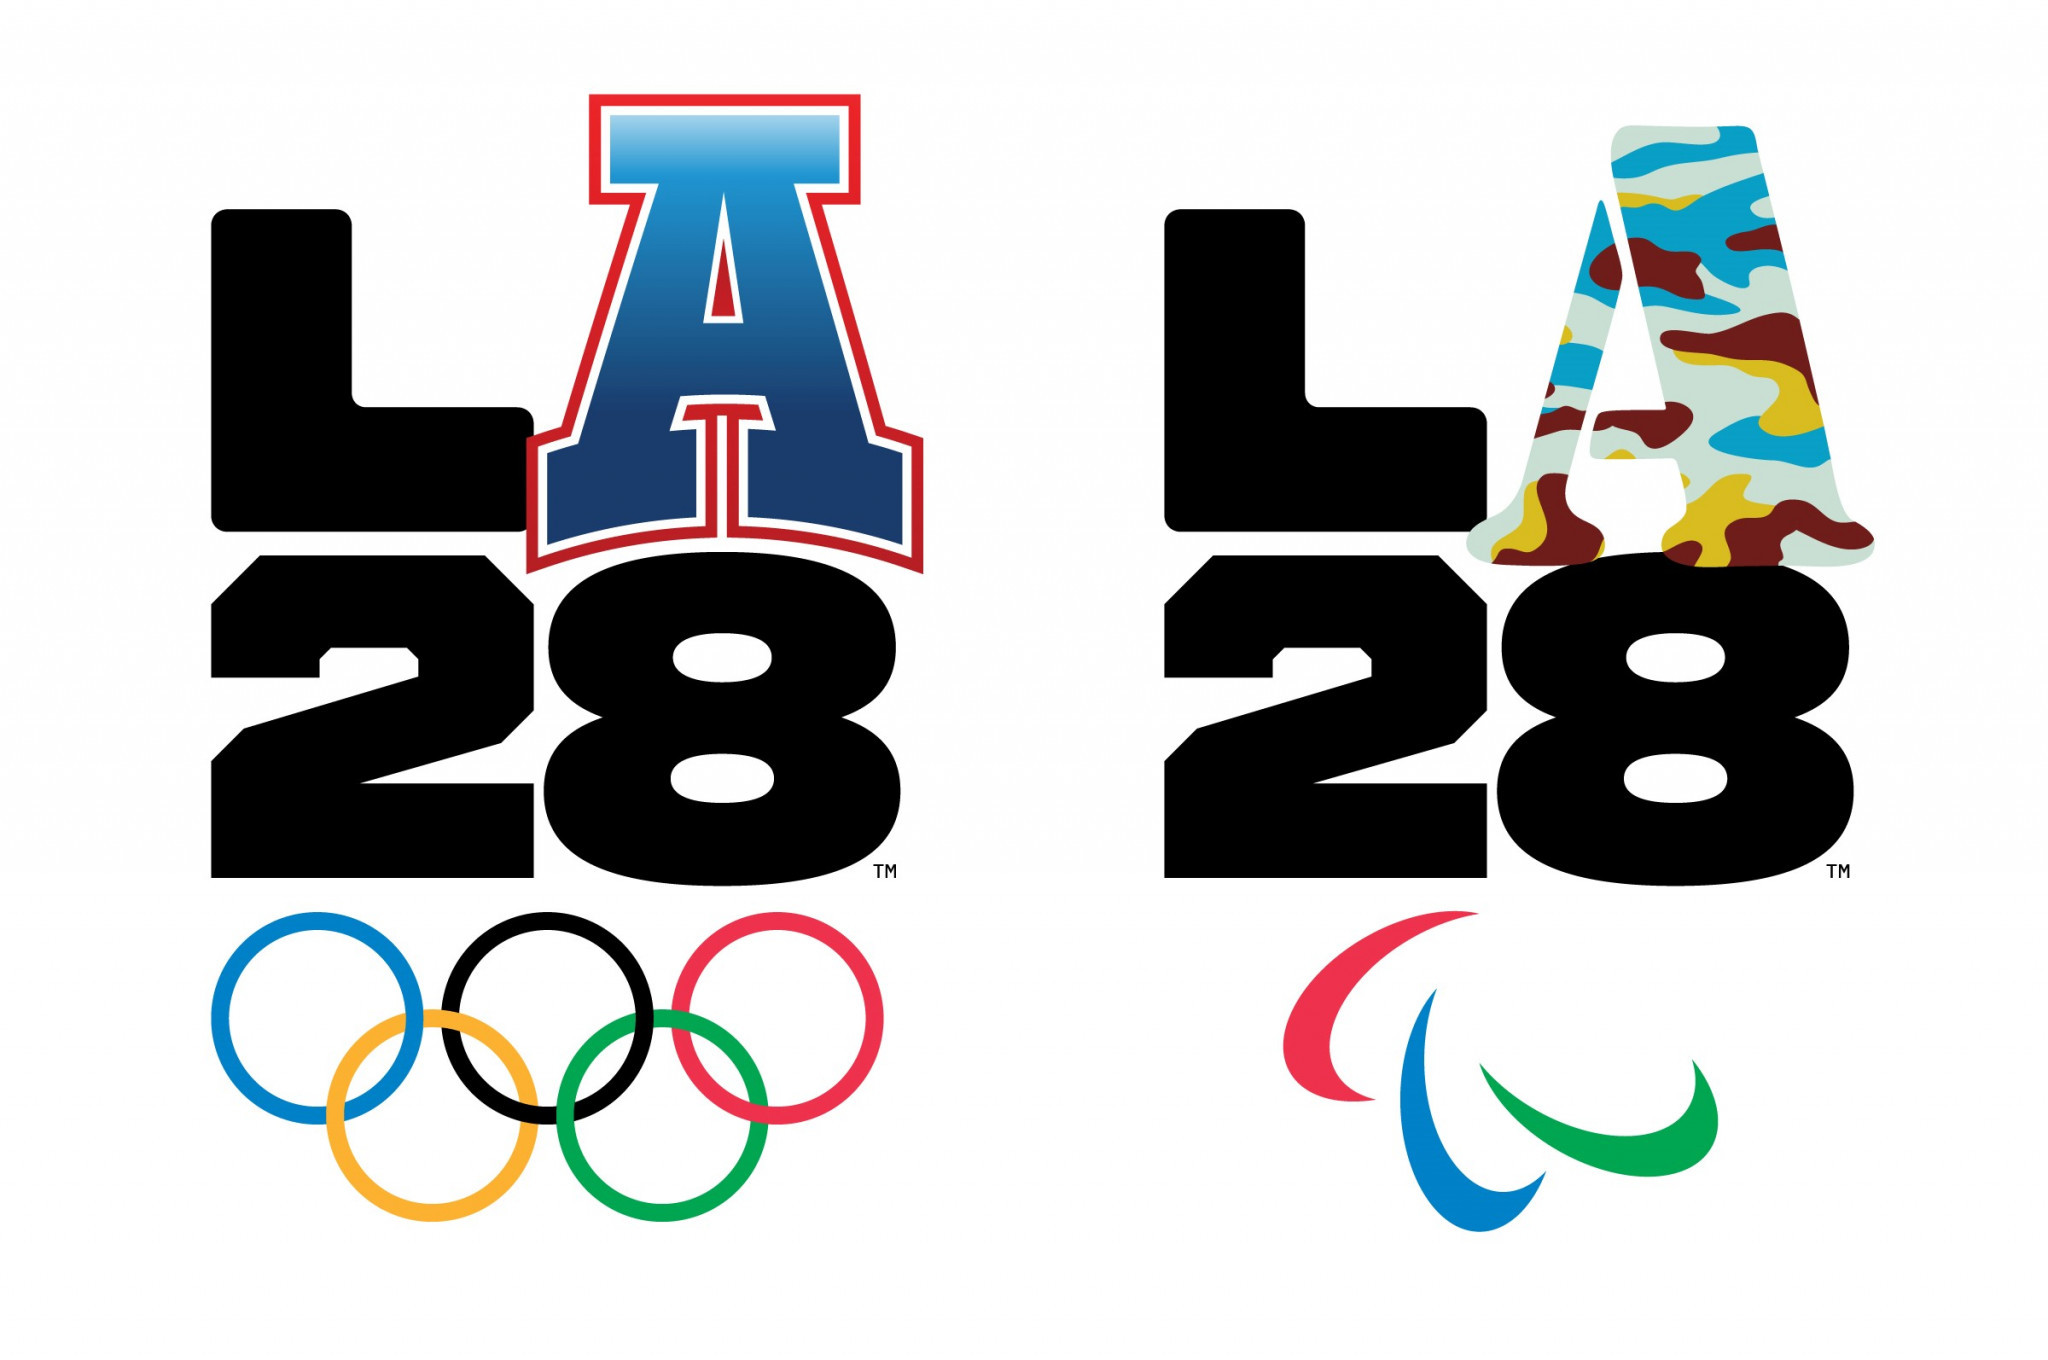 Los Angeles 2028 organisers hold initial meetings with community leaders as part of Games planning